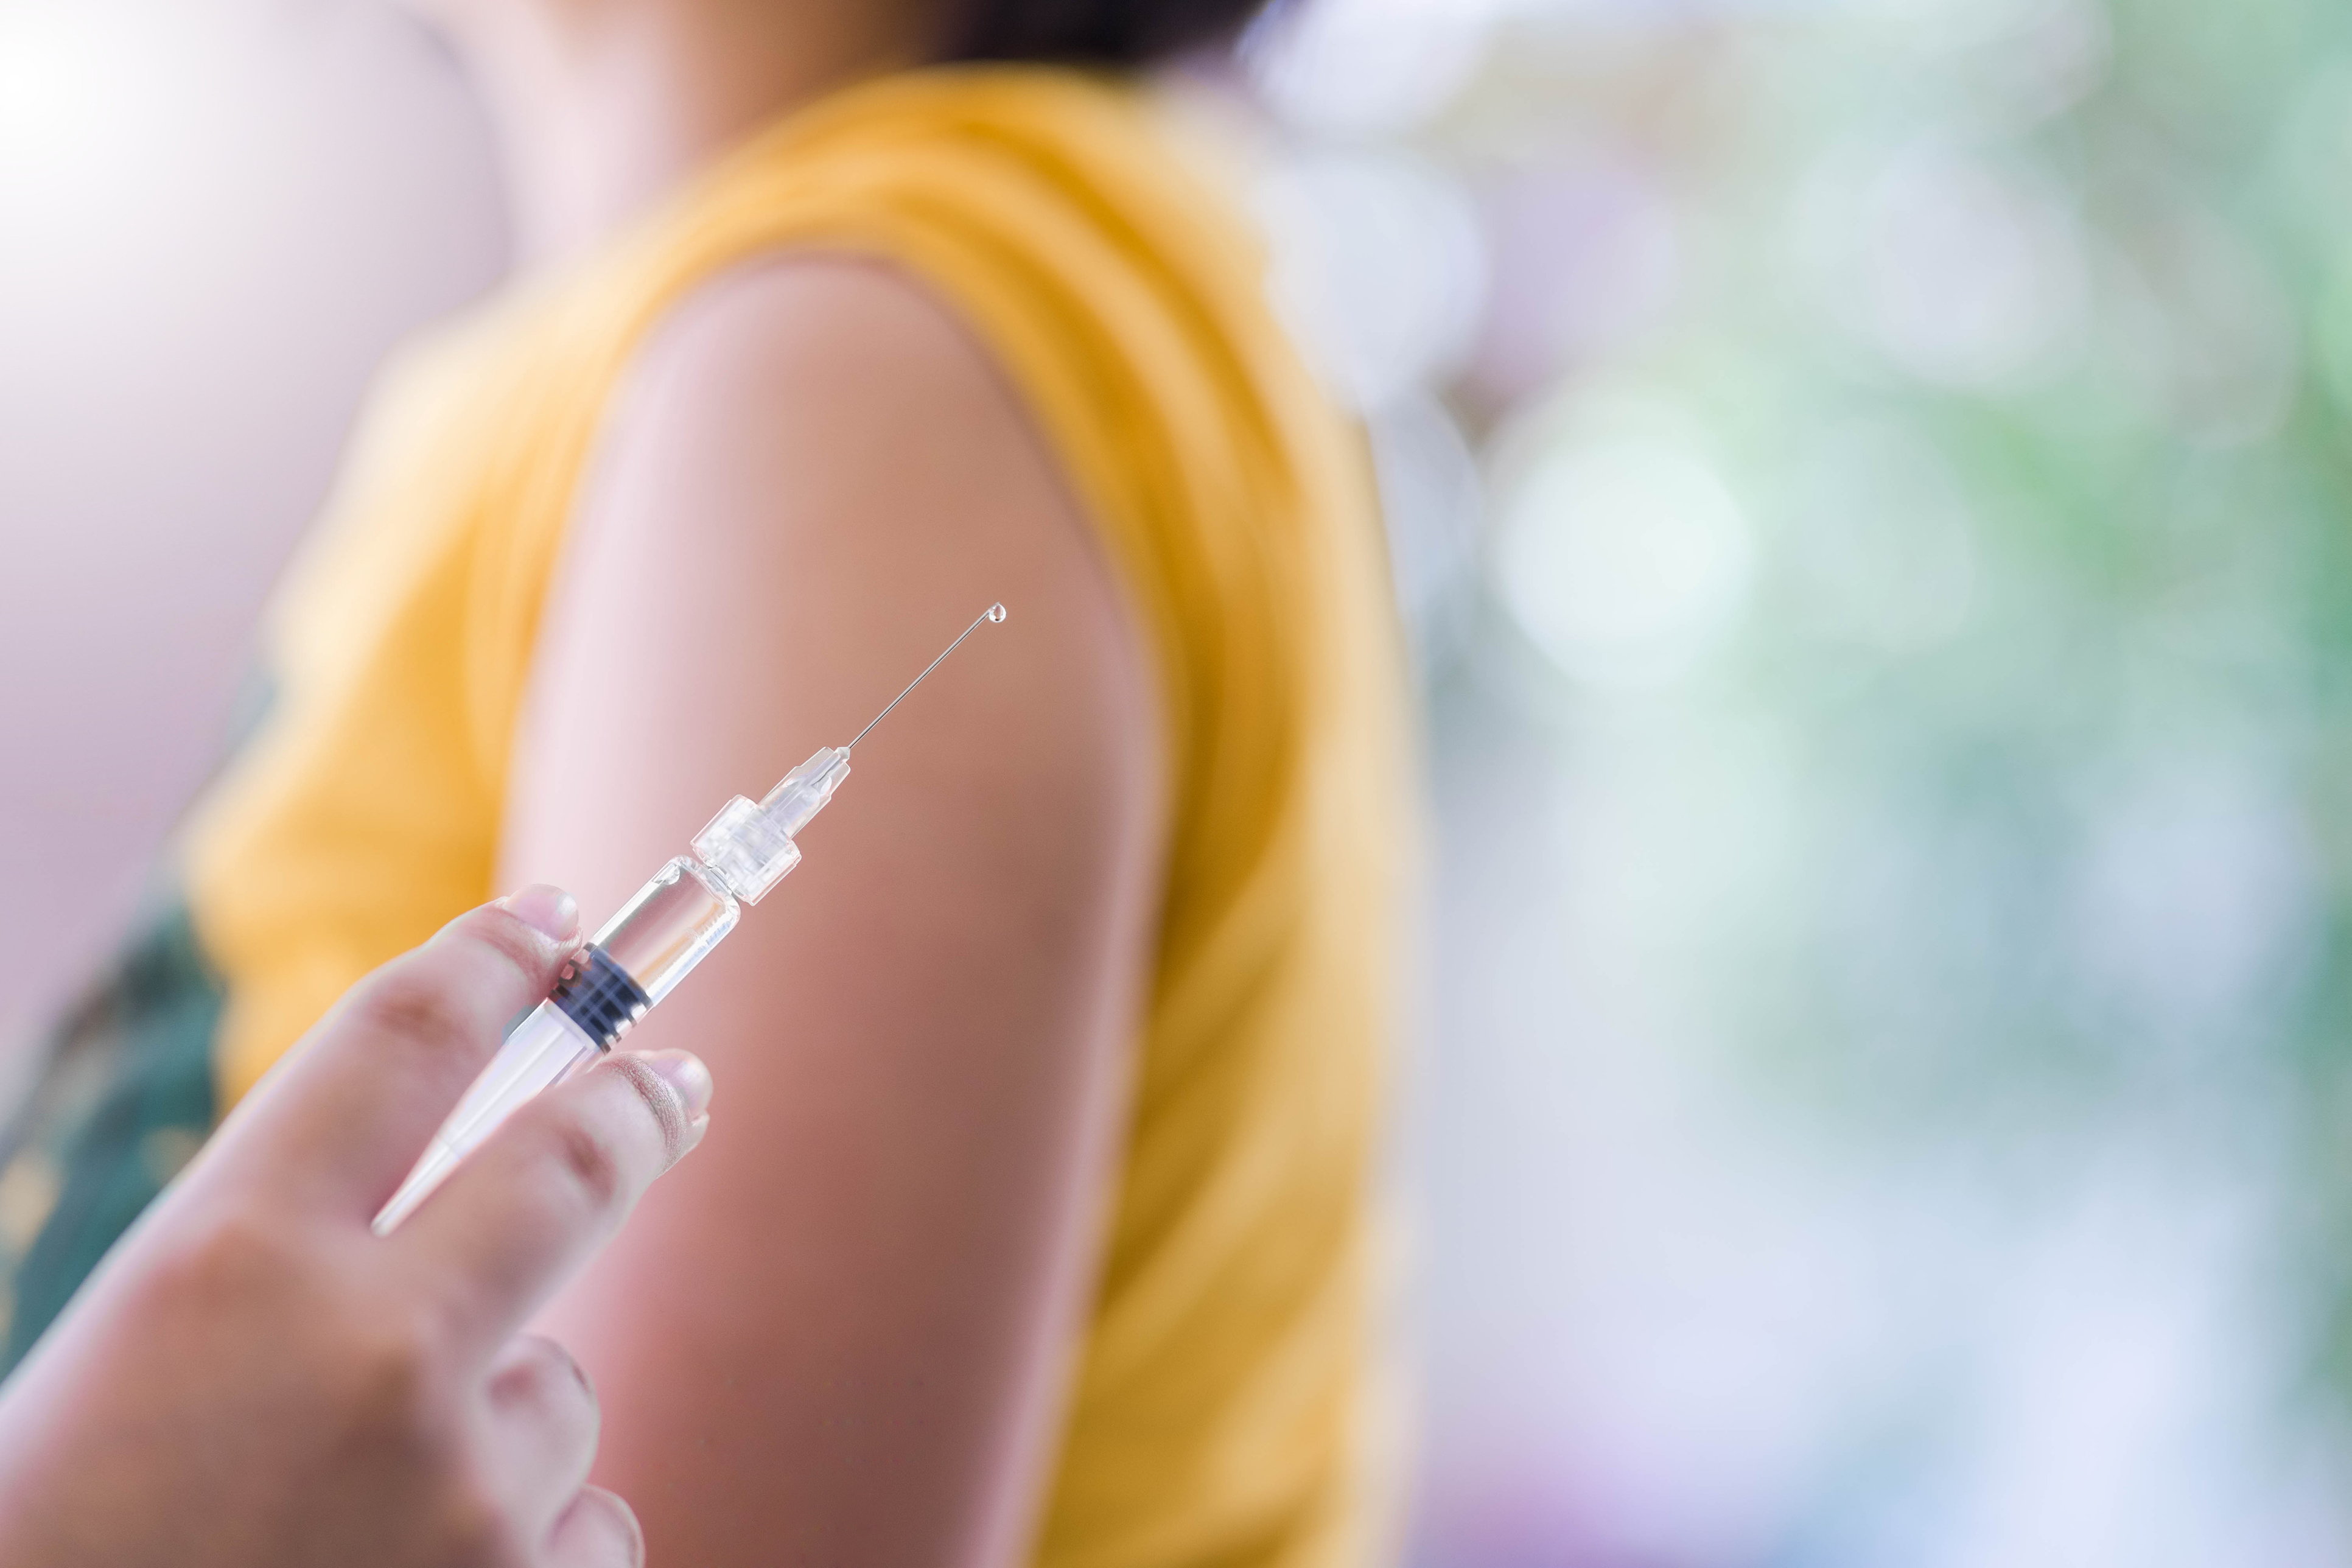 Article image for Australia secures another 10 million COVID-19 vaccine doses